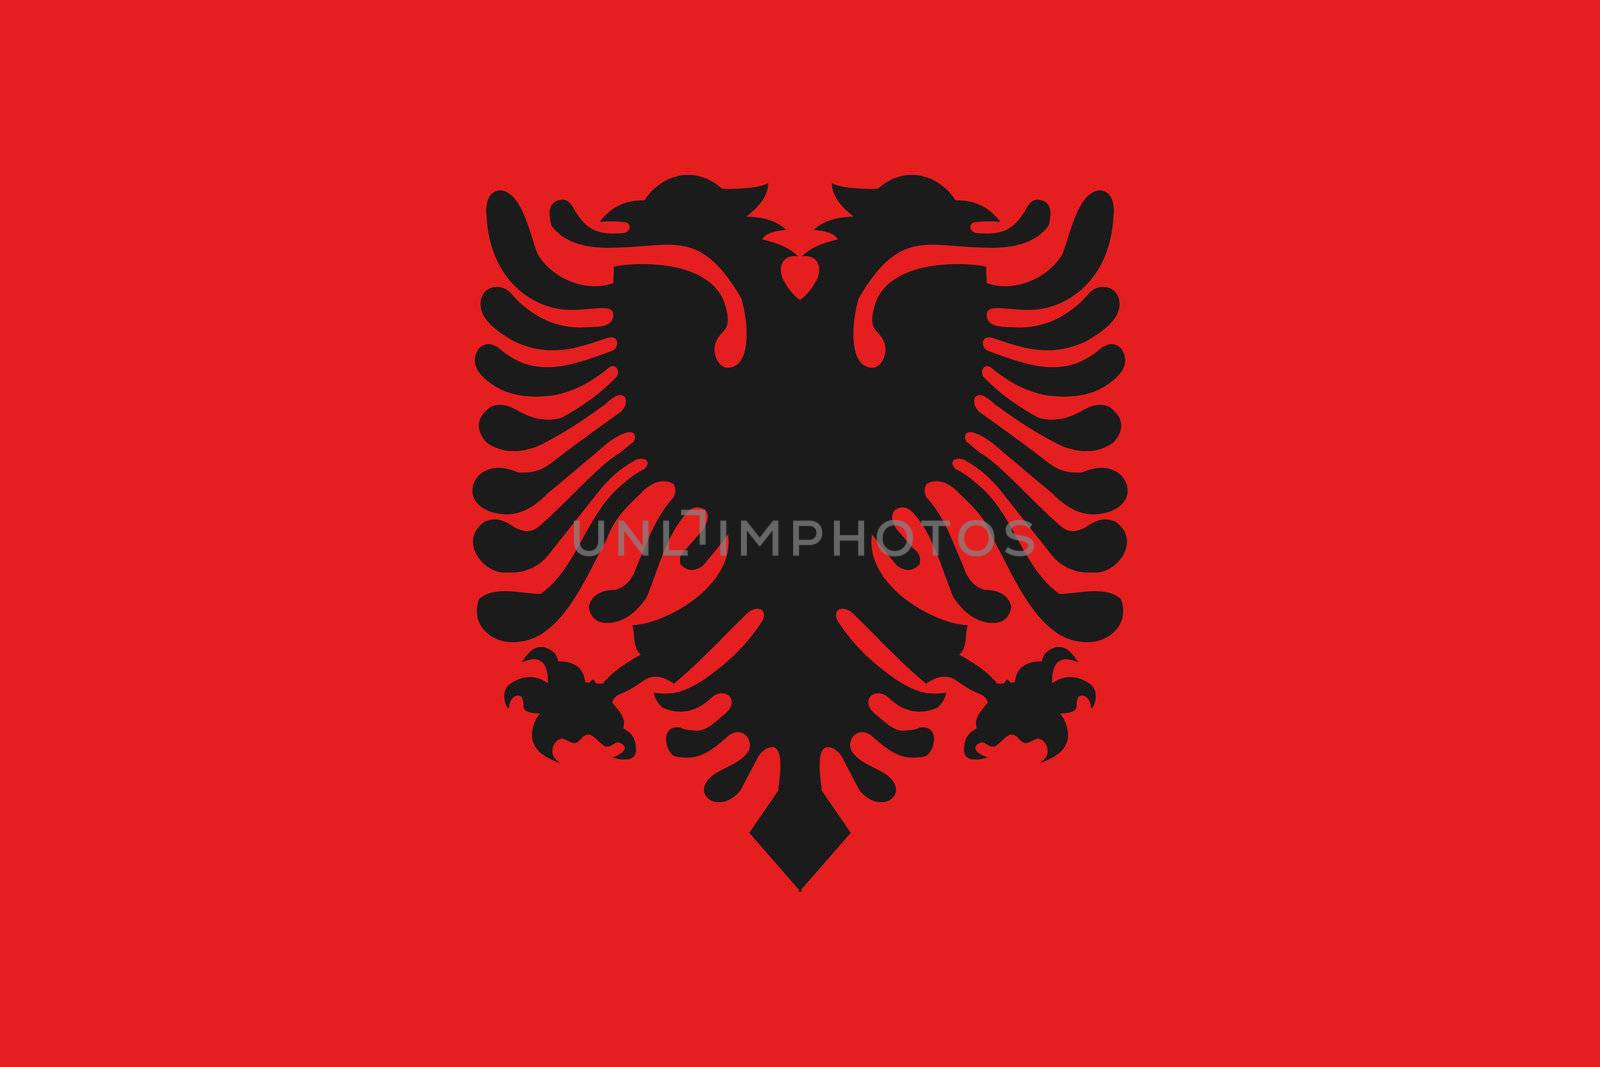 An illustration of the flag of Albania